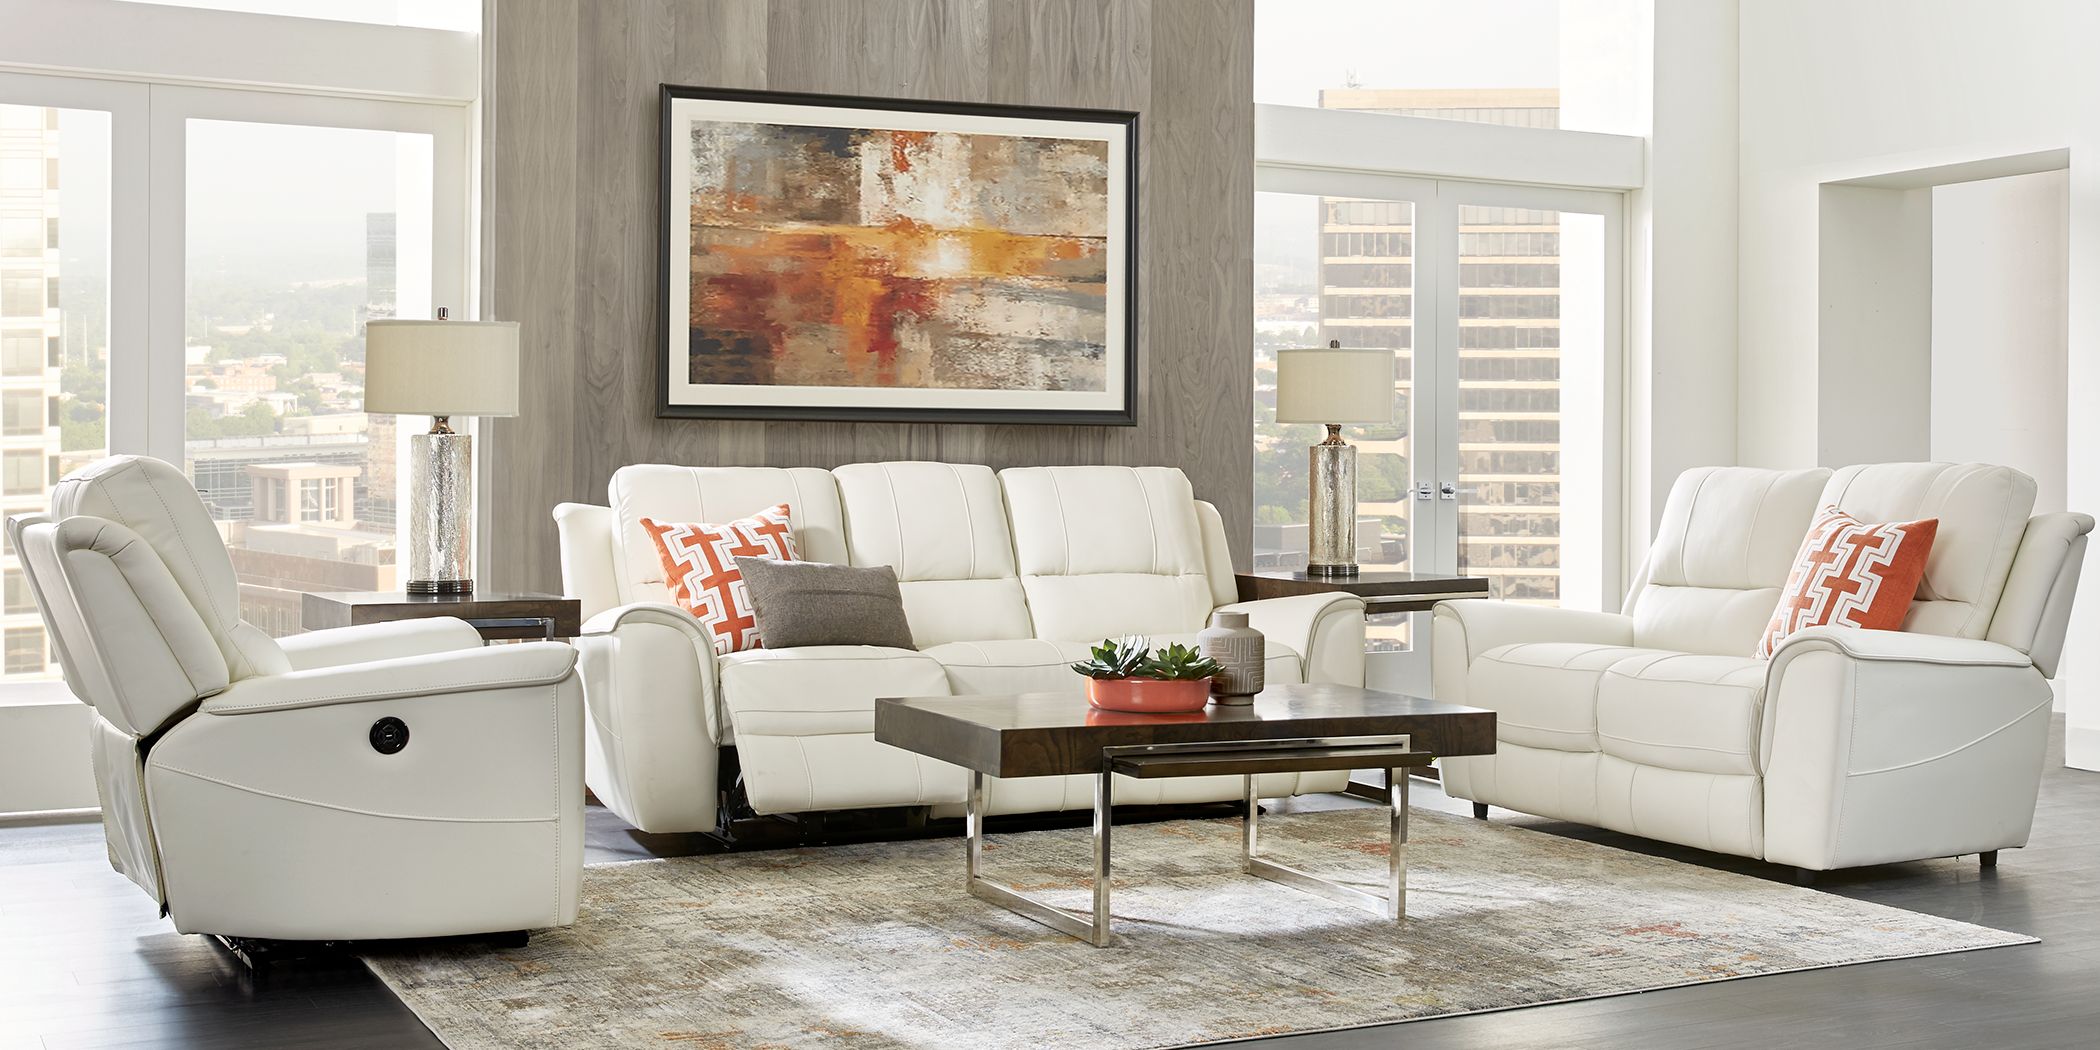 Https Wwwroomstogocom Furniture Product Lanzo Off White Leather 3 Pc Living Room With Reclining Sofa 1152879P